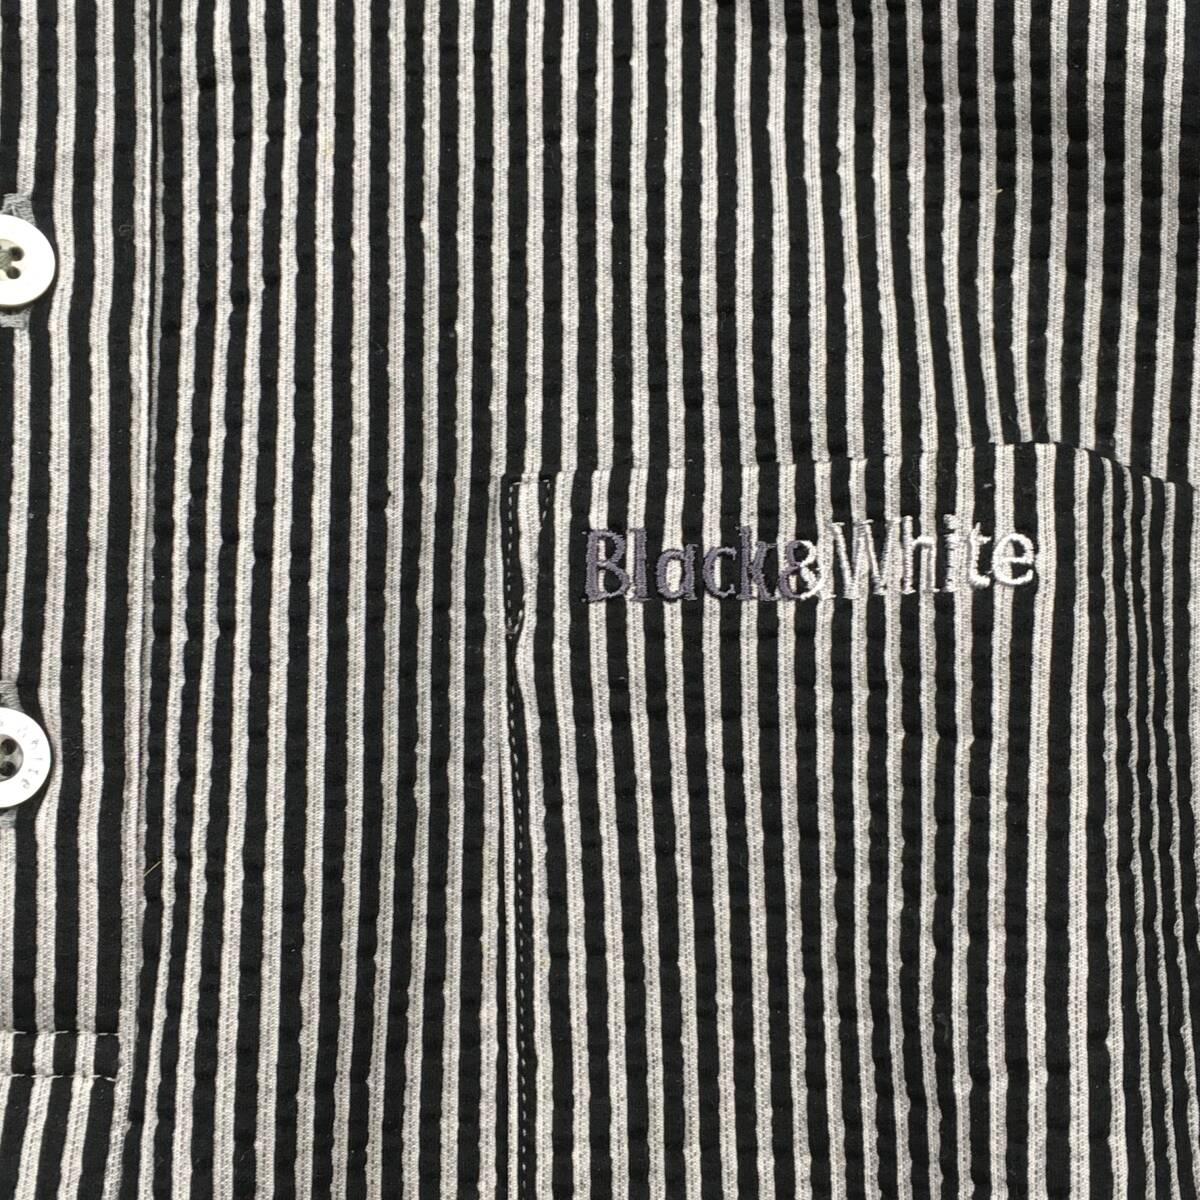  ultimate beautiful goods [Black&White/ black & white ] elegant stripe pattern *sia soccer cloth B.D polo-shirt with short sleeves L thin men's Golf wear made in Japan 